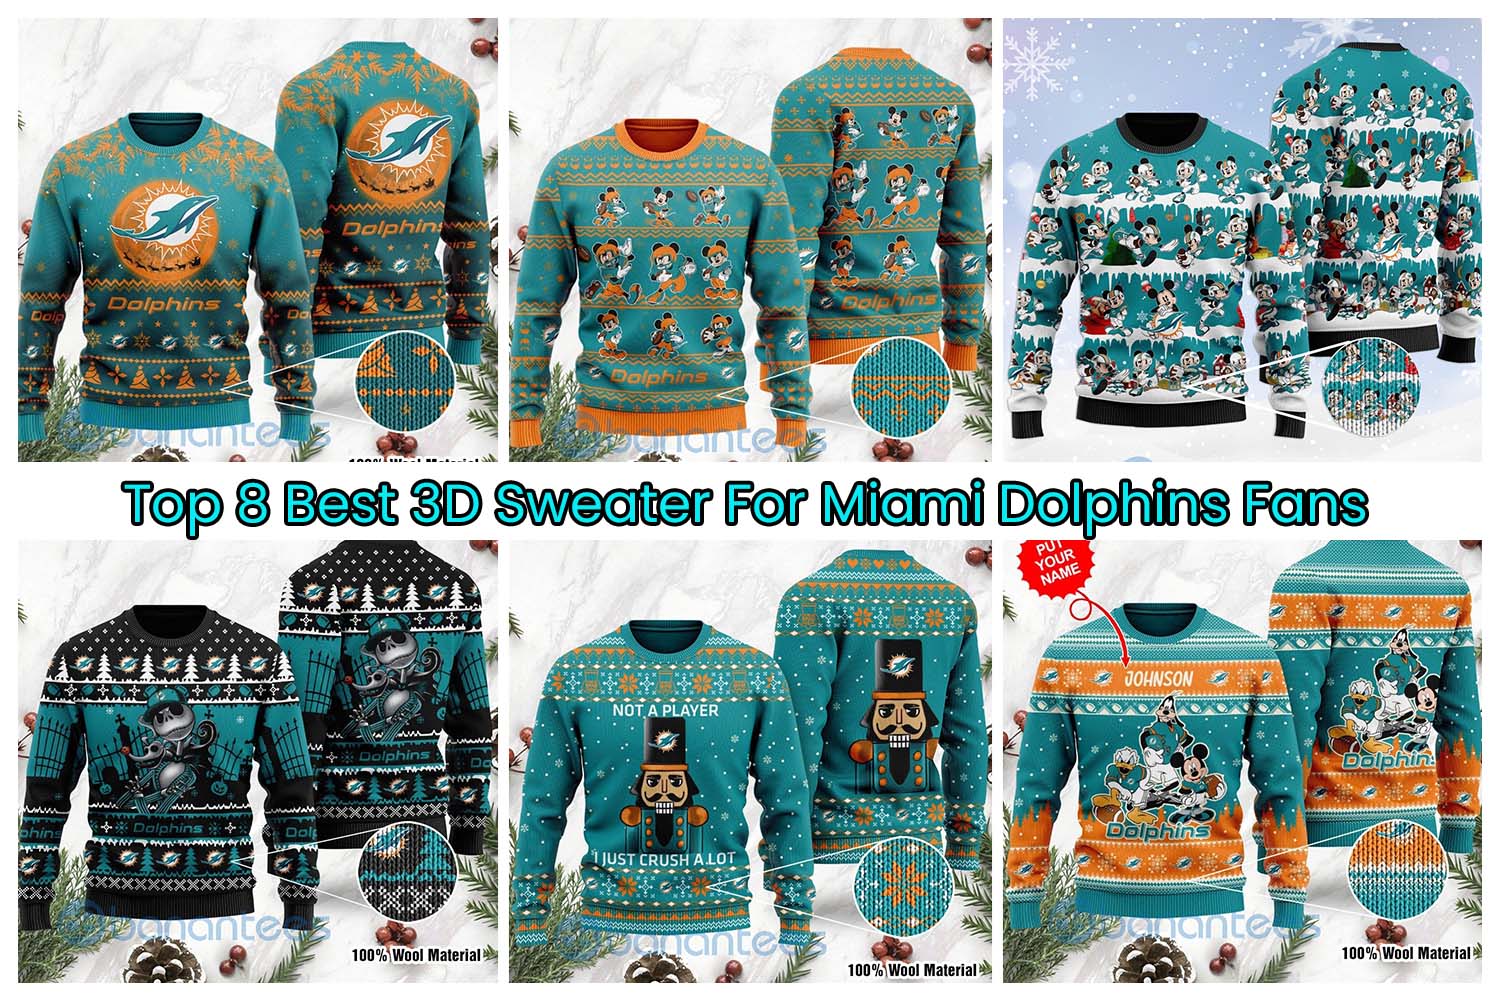 Top 8 Best 3D Sweater For Miami Dolphins Fans